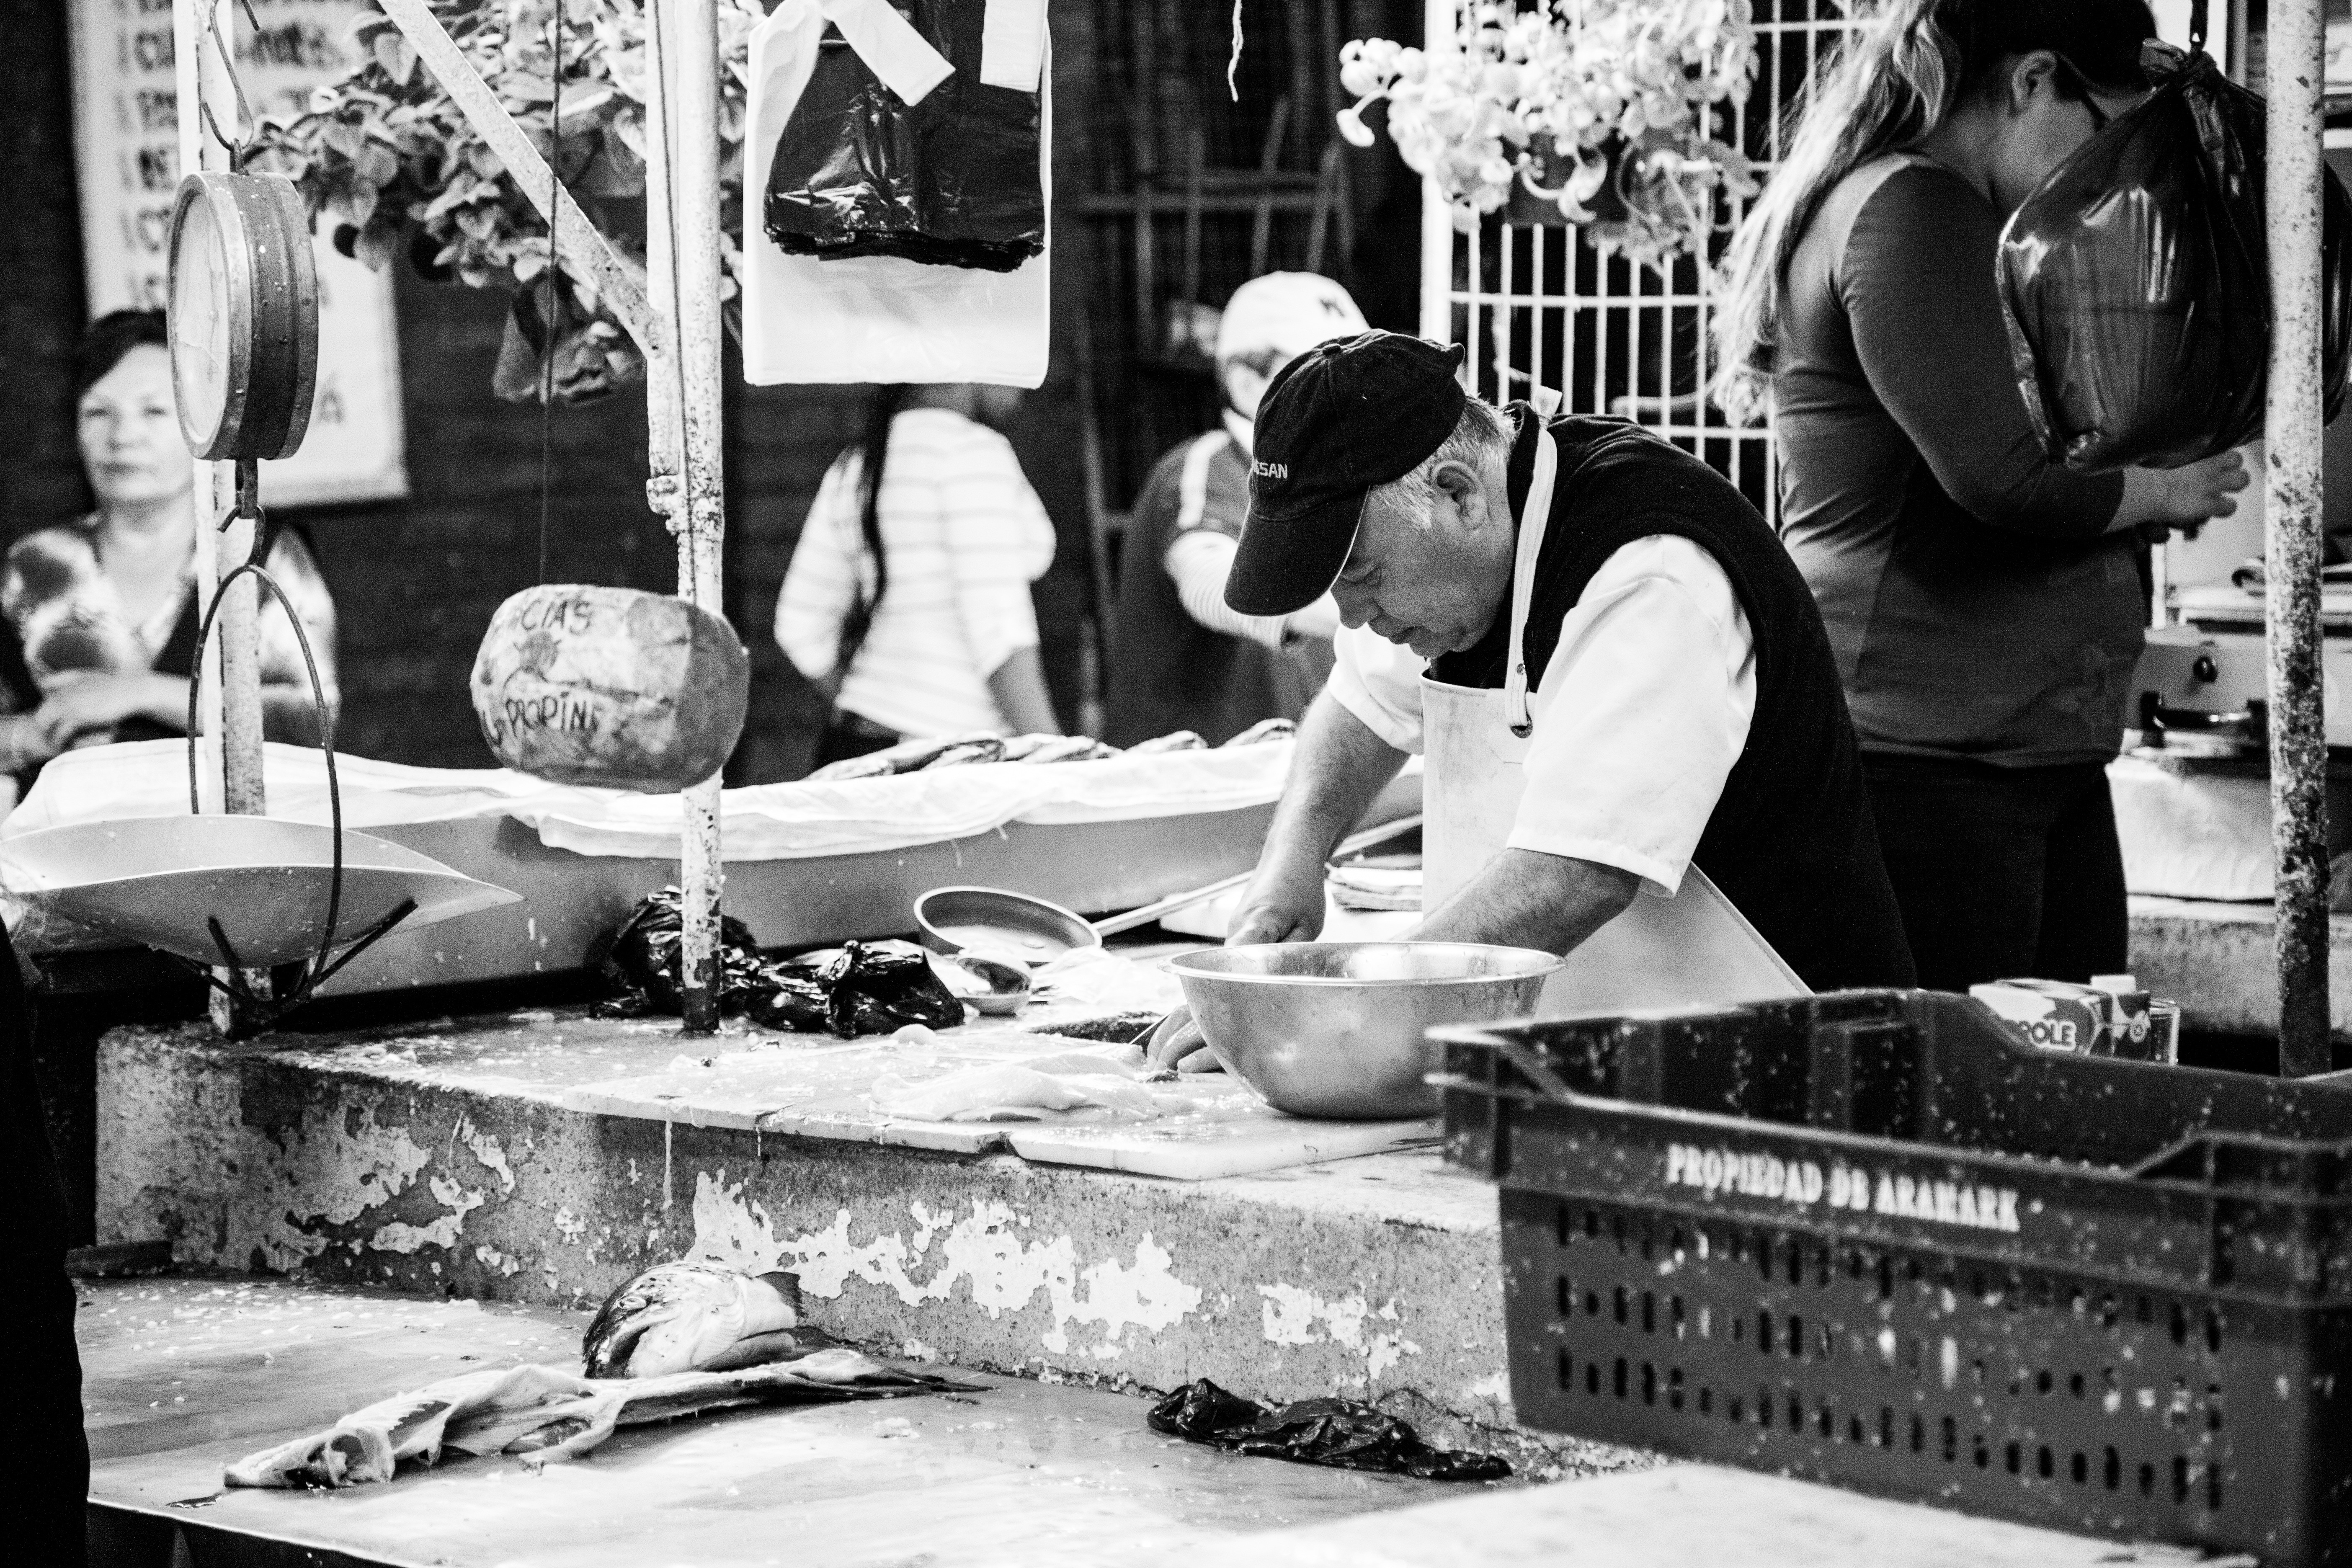 man selling fish in wet market grayscale photo free image | Peakpx